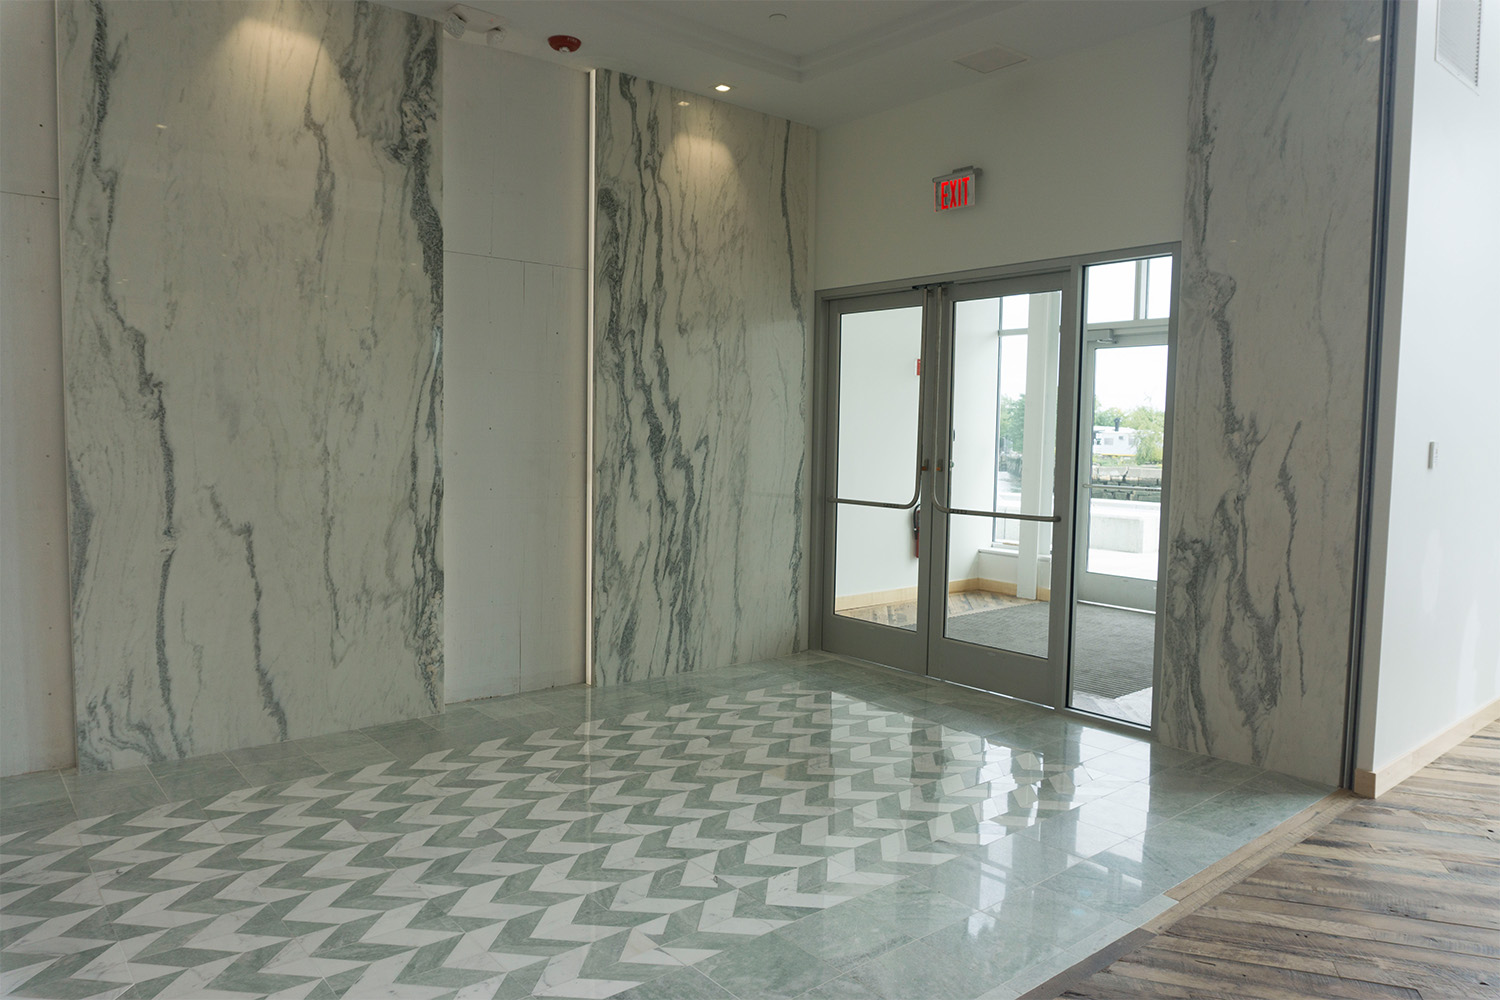 Reception room with white marble walls and floor with arrow-pattern design 